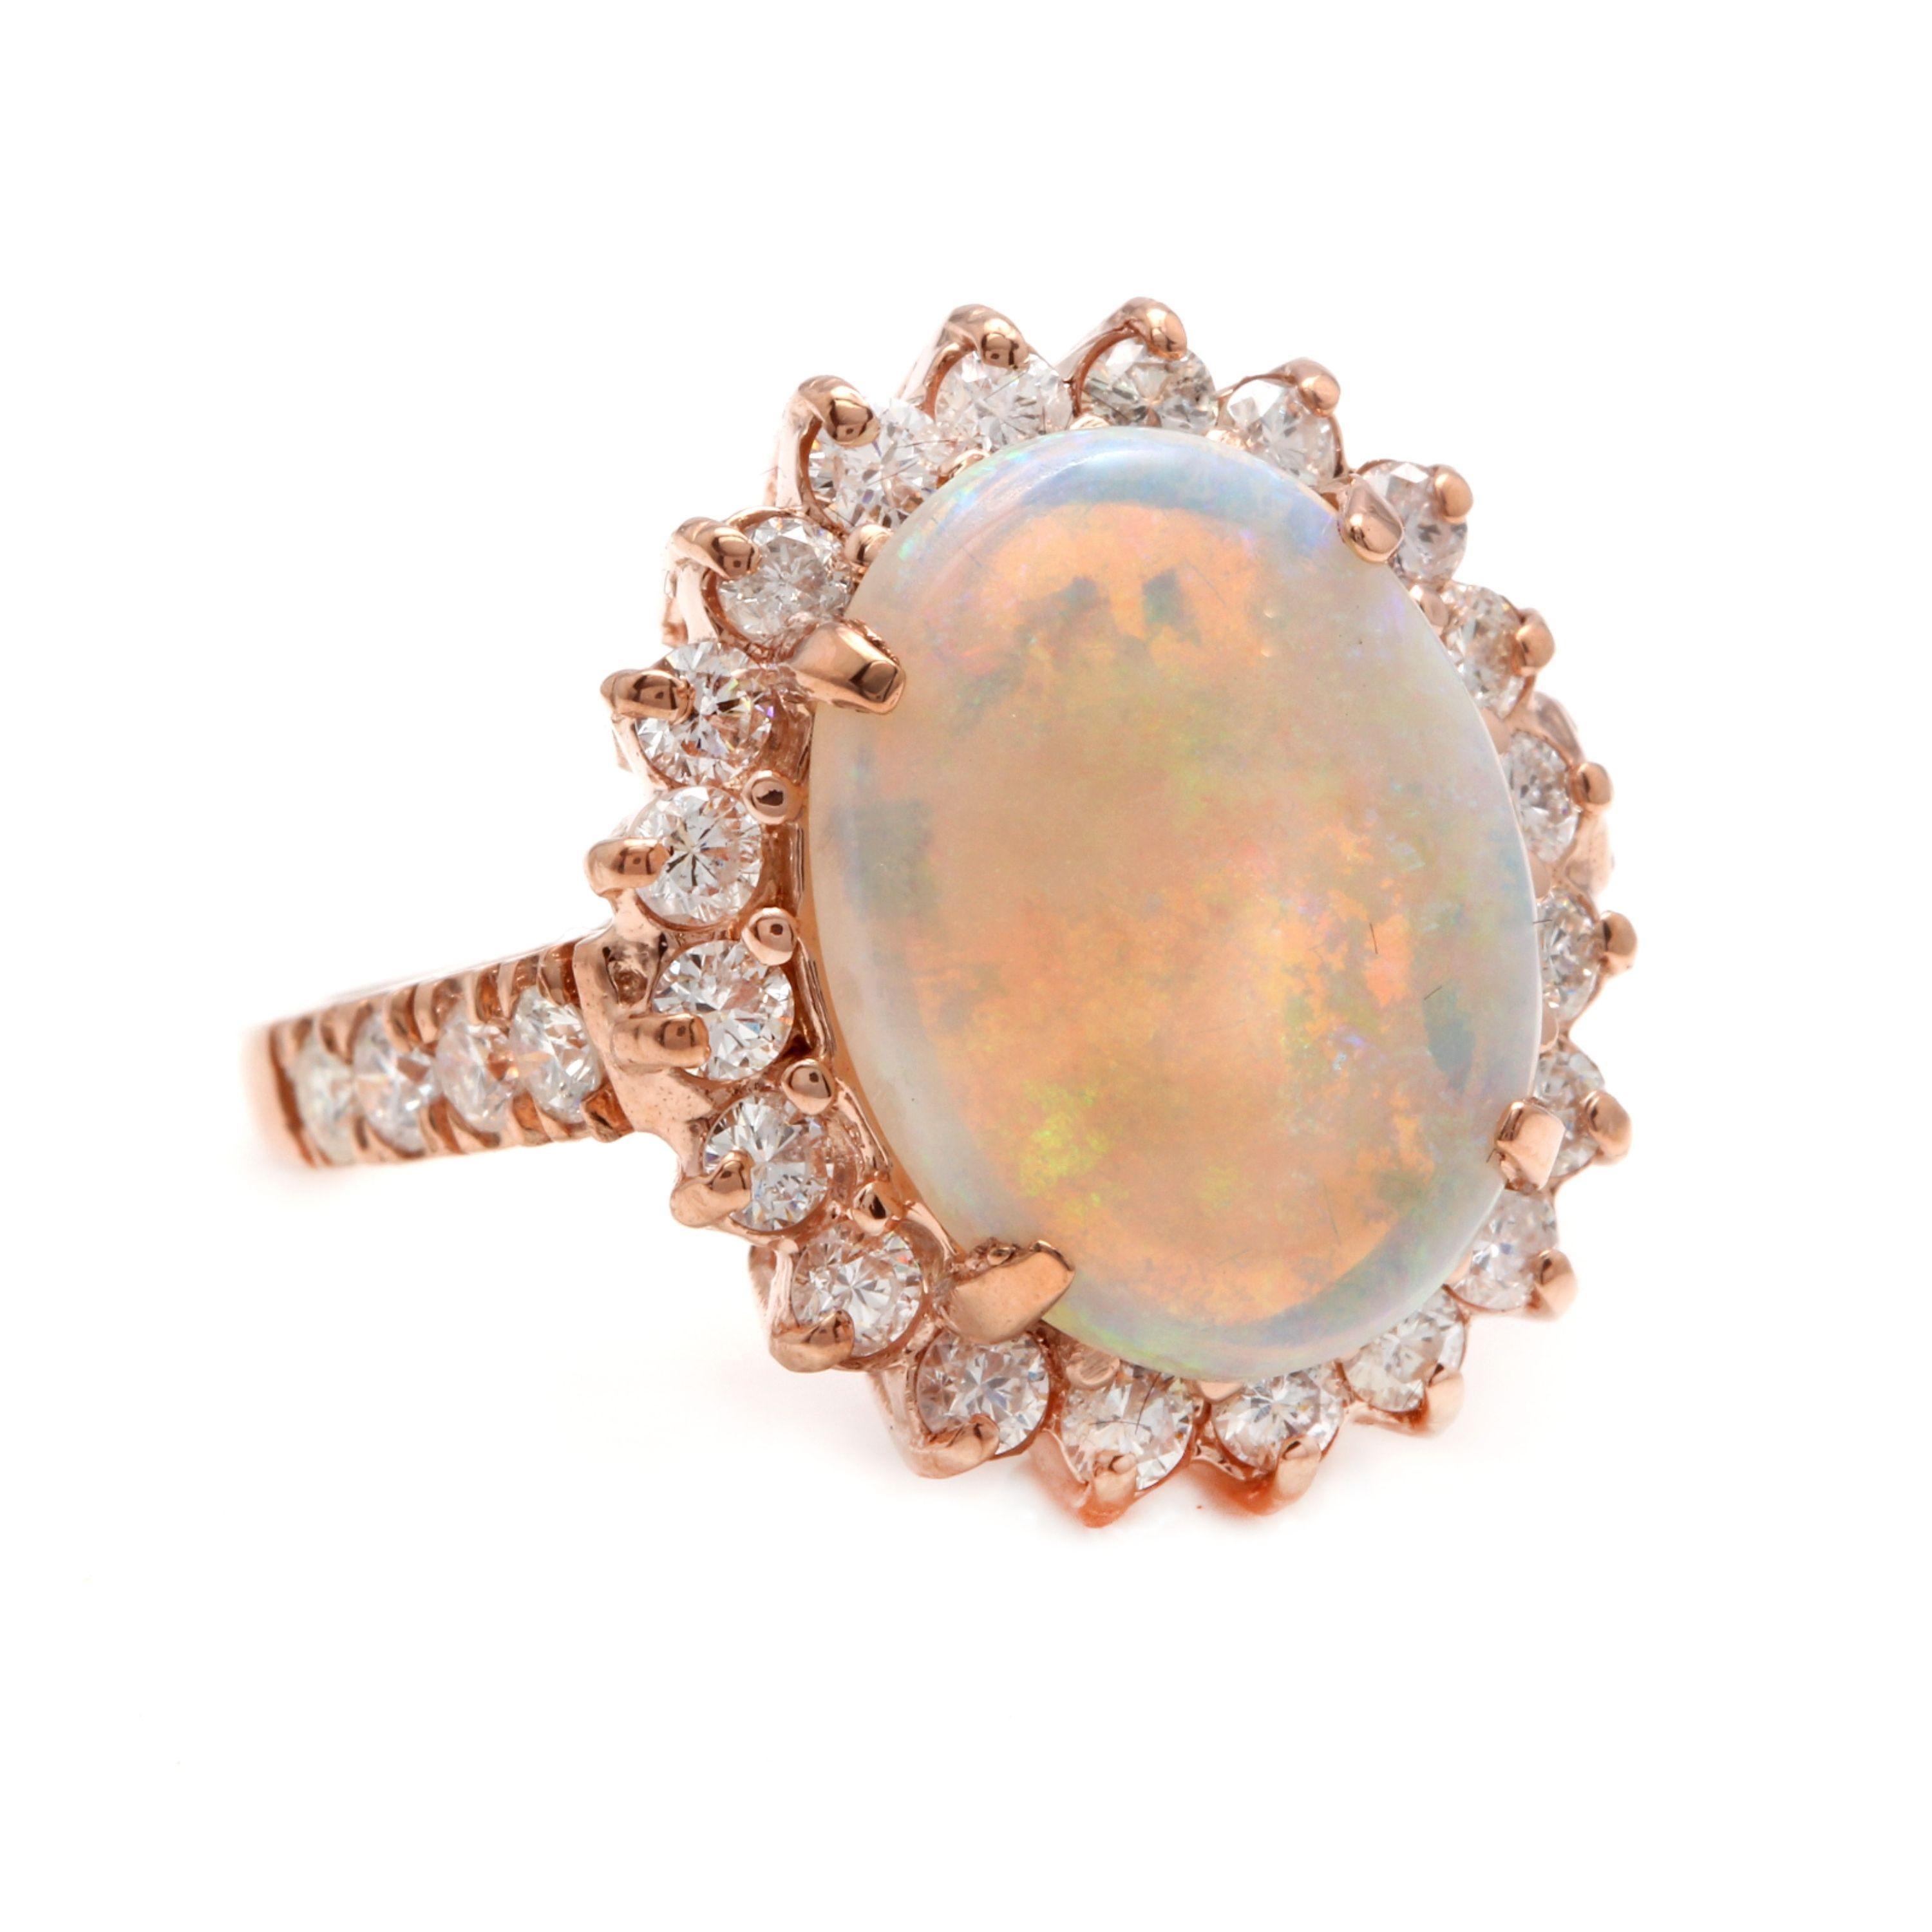 7.30 Carats Natural Impressive Australian Opal and Diamond 14K Solid Rose Gold Ring

Amazing play of colors opal. Pictures don't show the beauty of the opal.

Total Natural Opal Weight is: Approx. 6.00 Carats

Opal Measures: Approx. 15.00 x